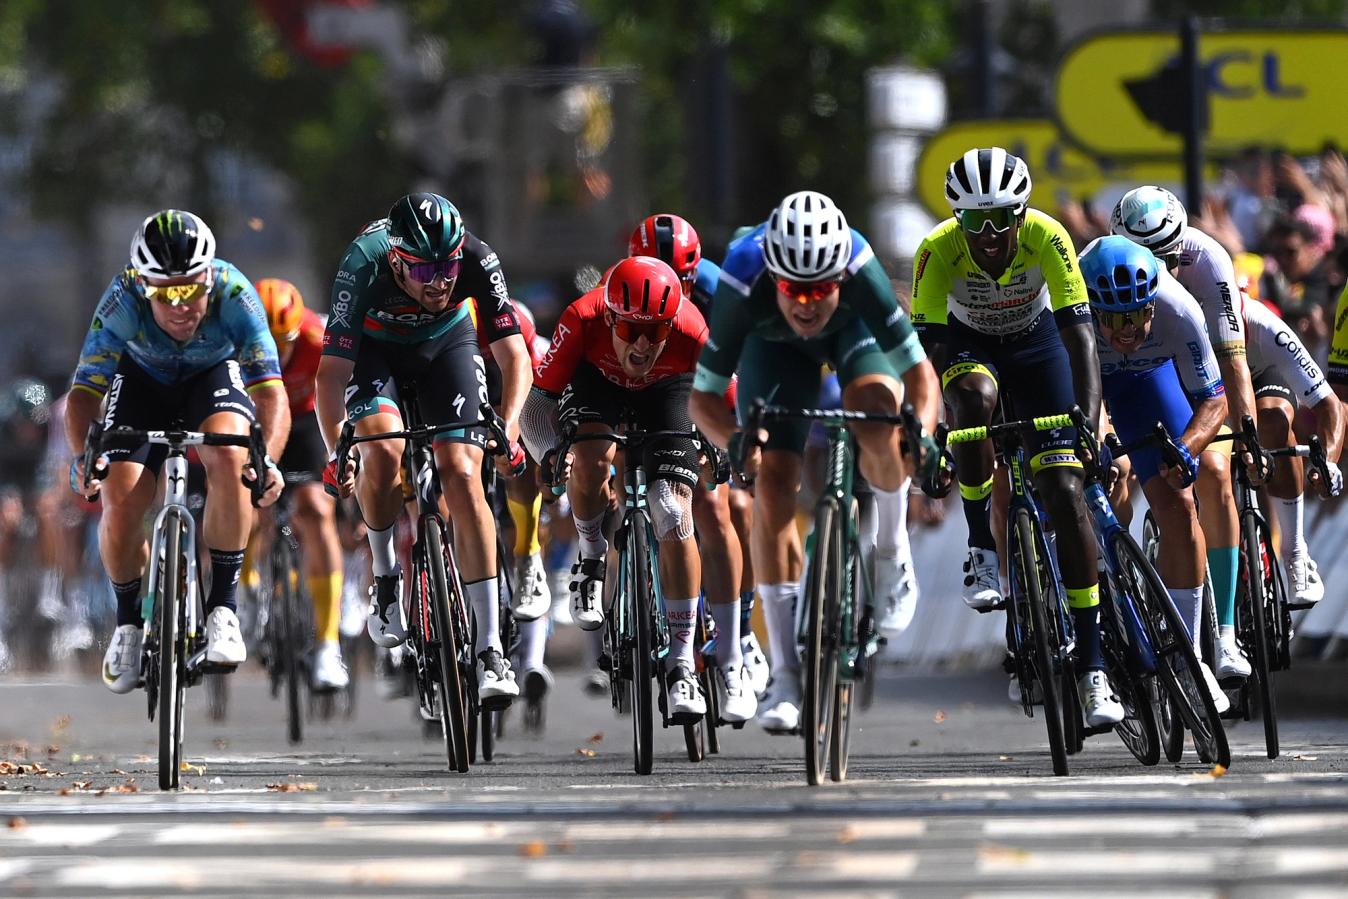 Mark Cavendish may have won stage 7 had it not been for gear issues